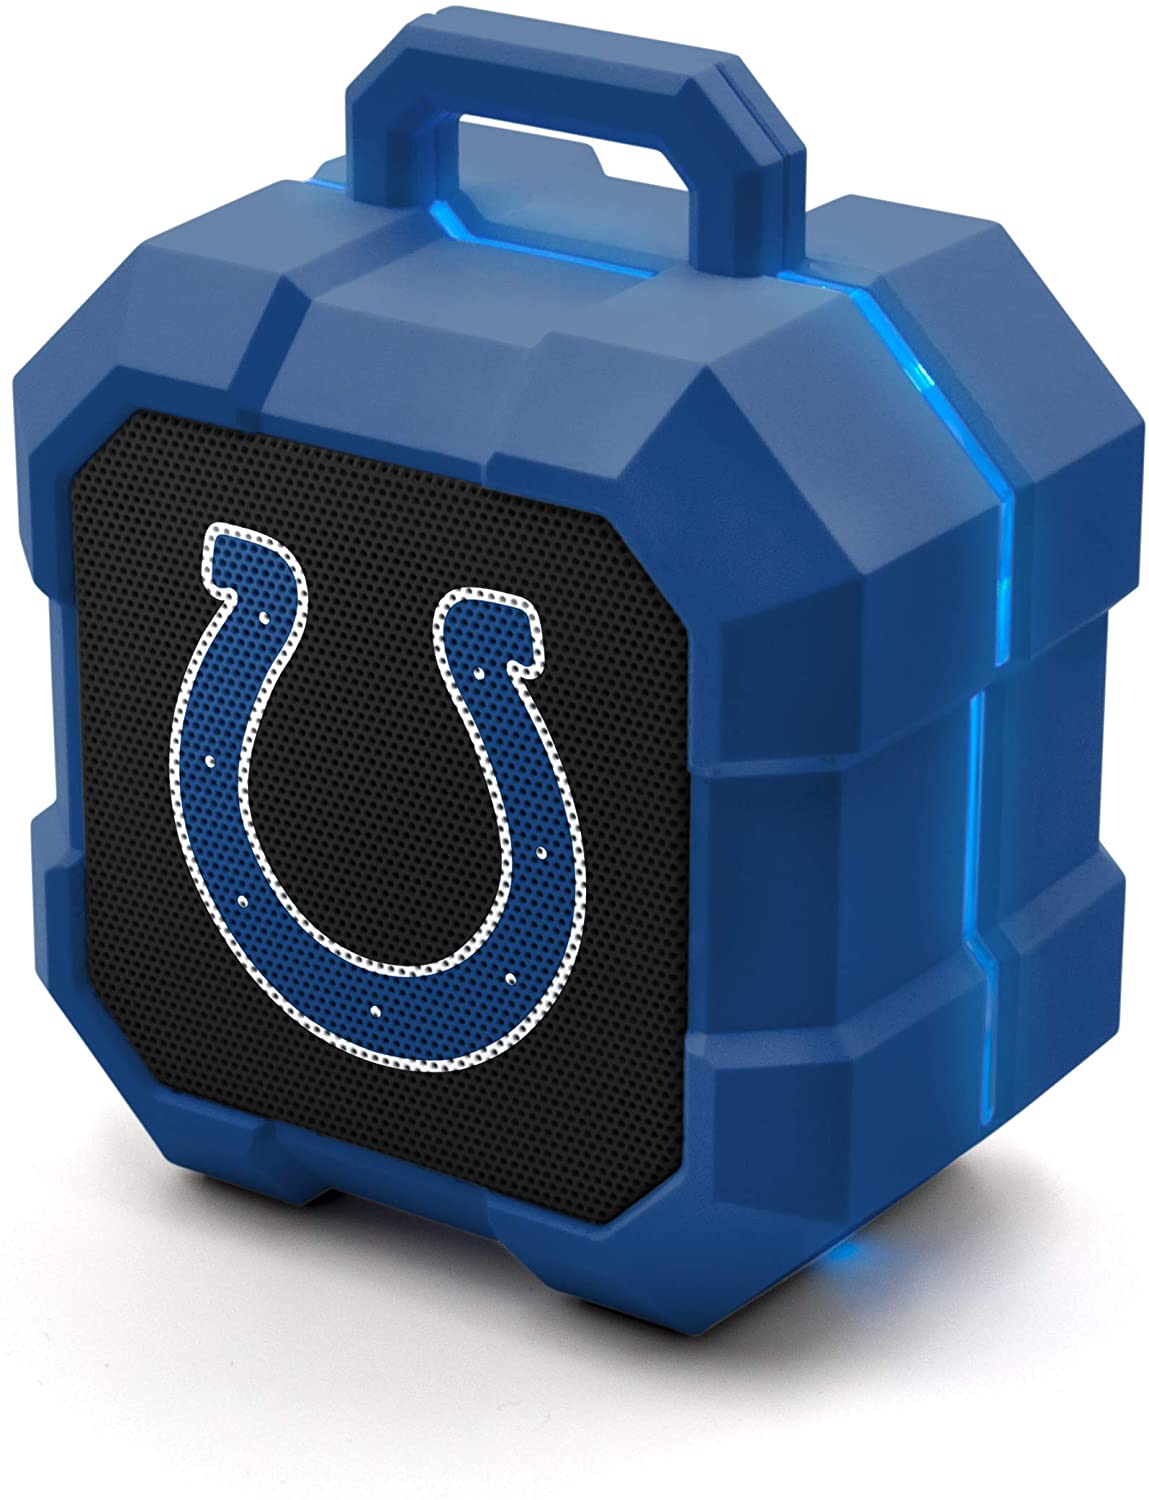 Indianapolis Colts Shockbox LED Wireless Bluetooth Speaker by Soar